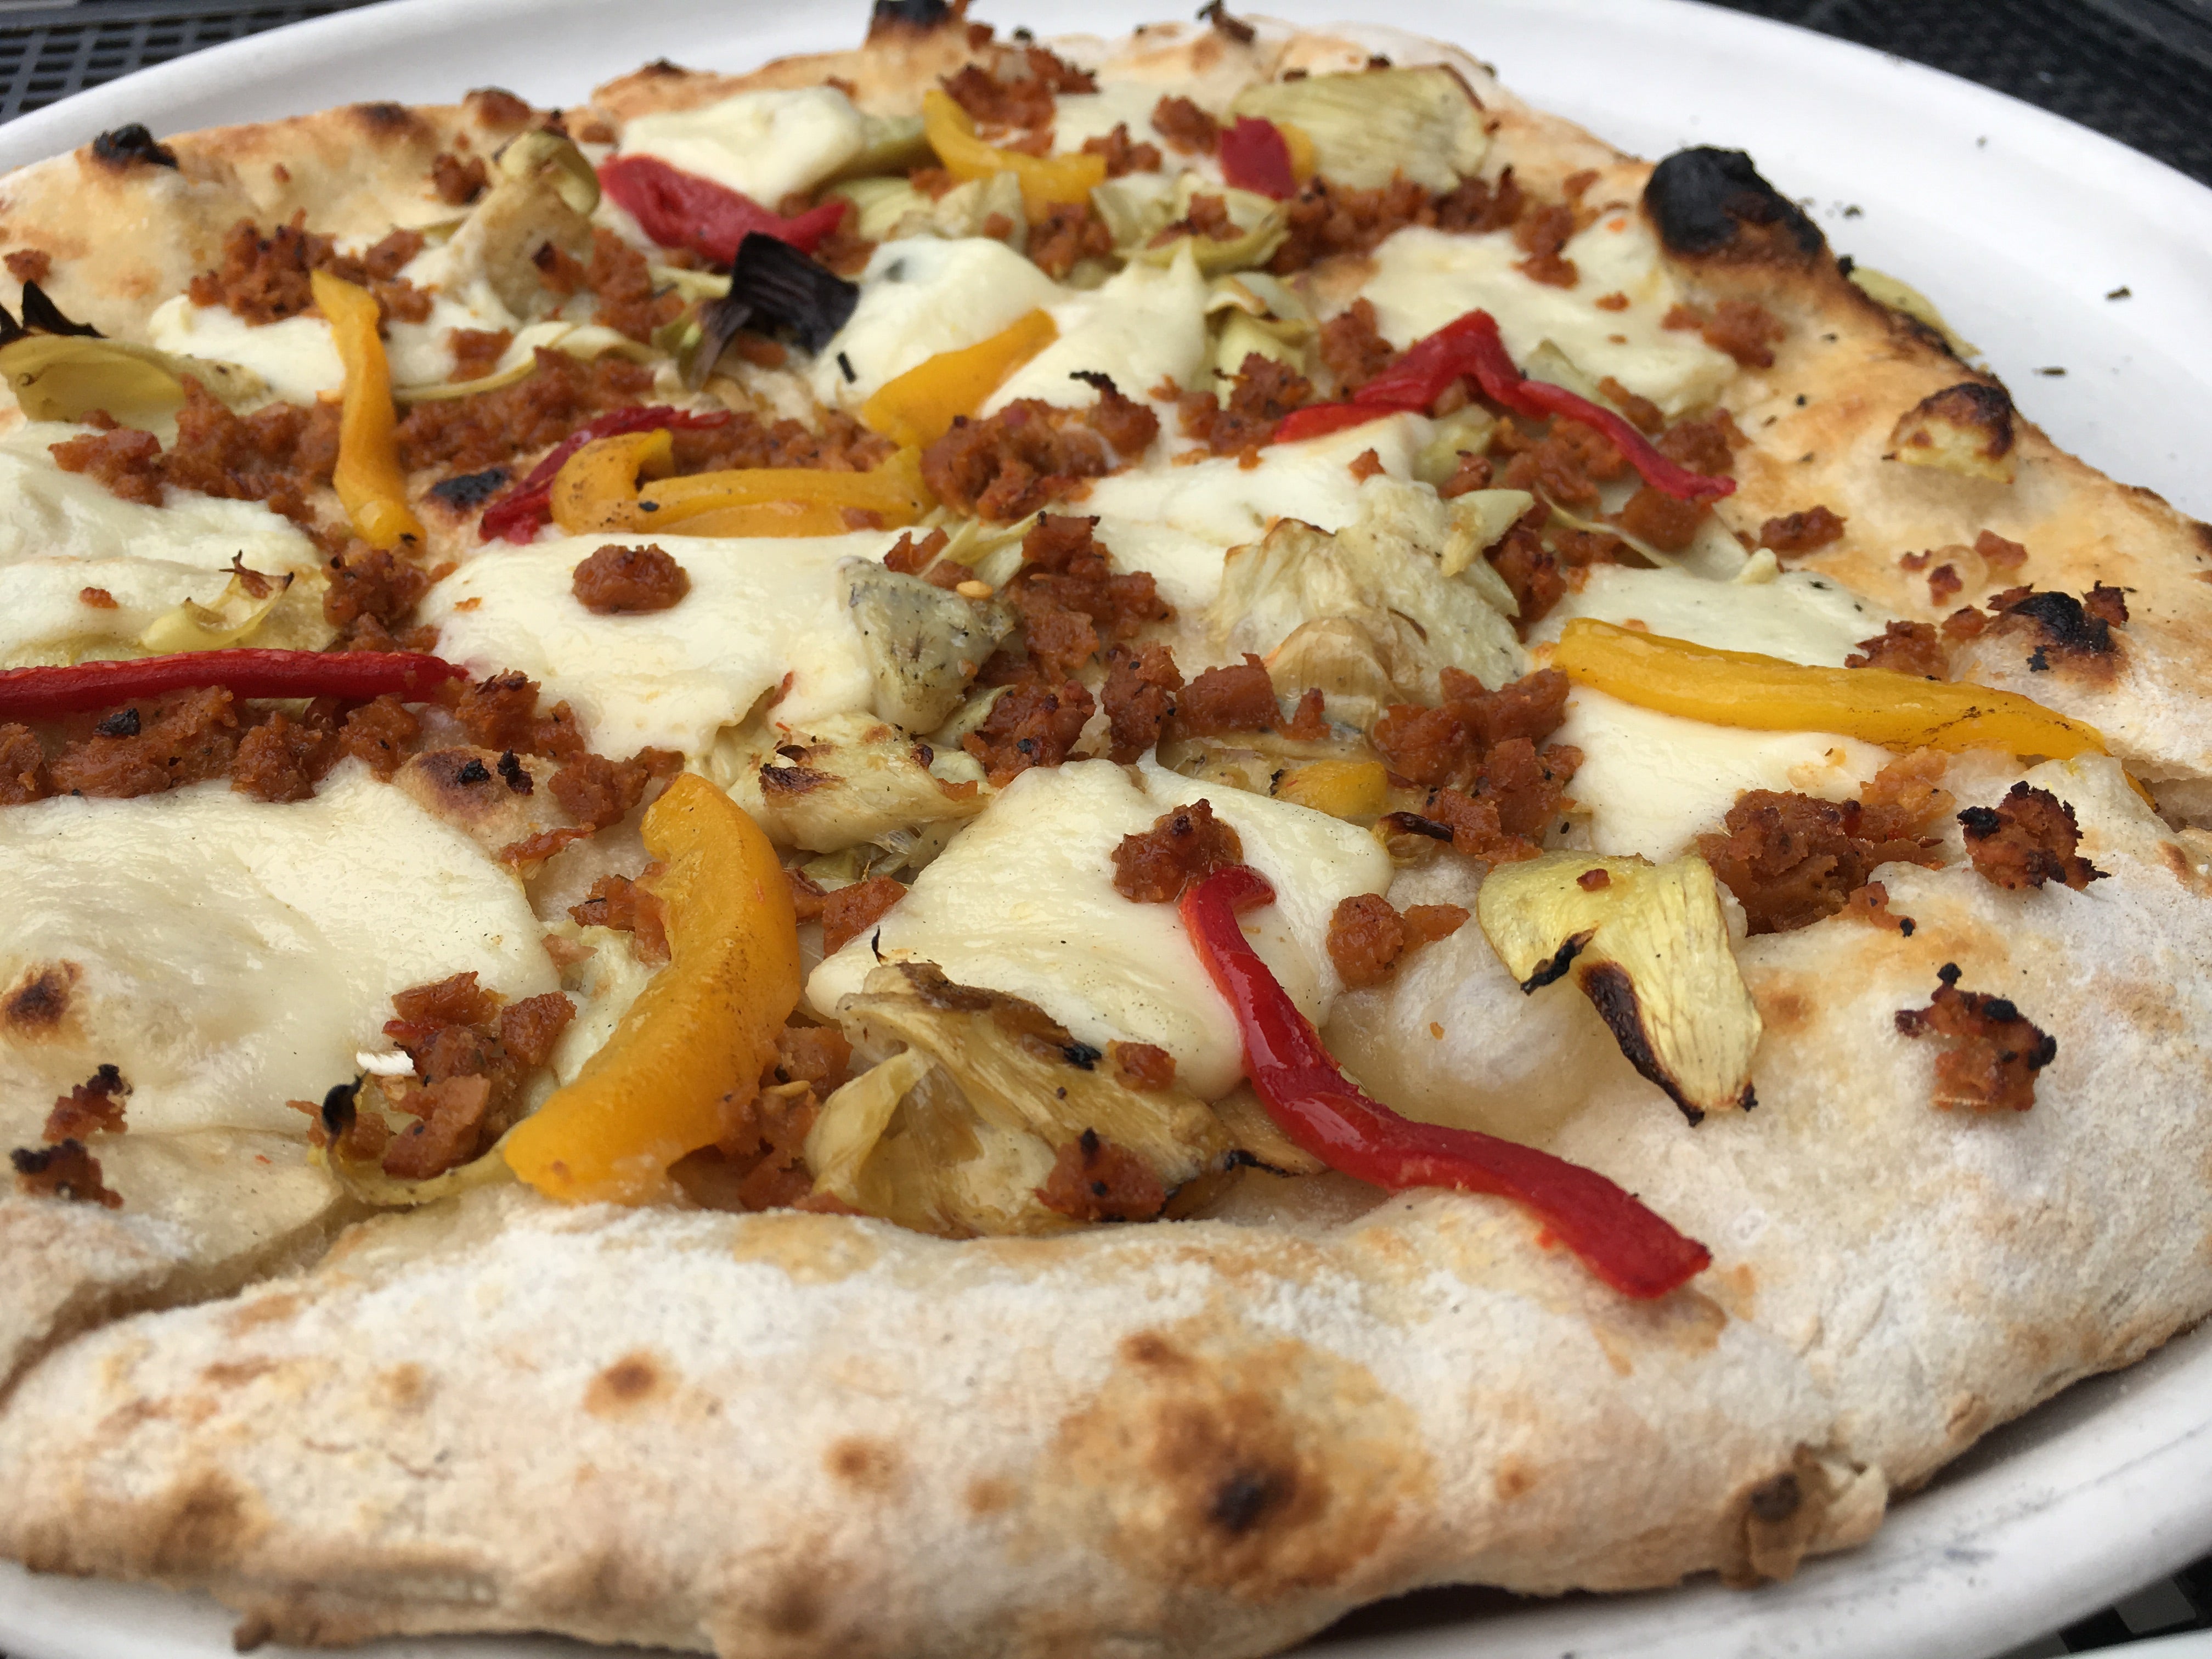 vegan pizza topped with mozzarella, sliced peppers, and sausage crumbles